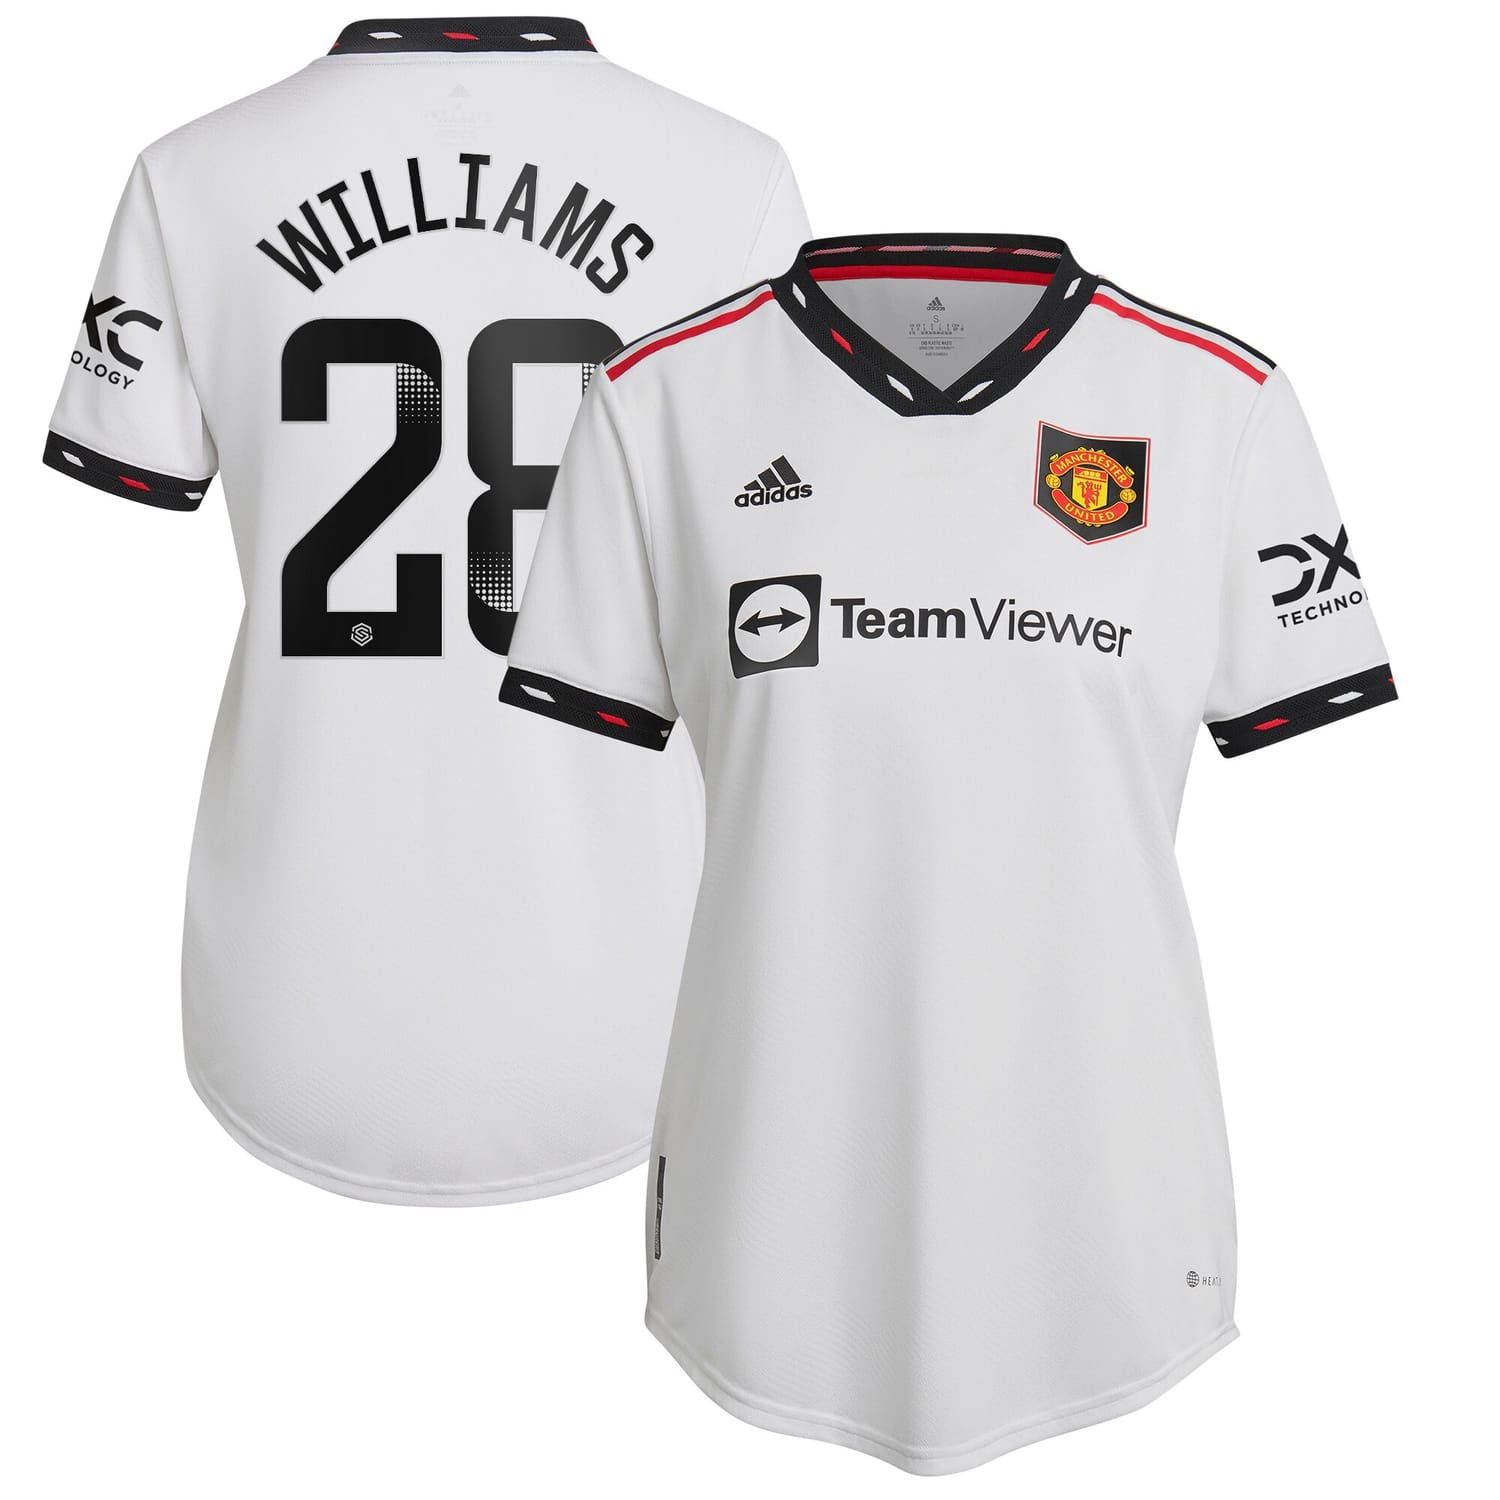 Premier League Manchester United Away WSL Authentic Jersey Shirt 2022-23 player Rachel Williams 28 printing for Women